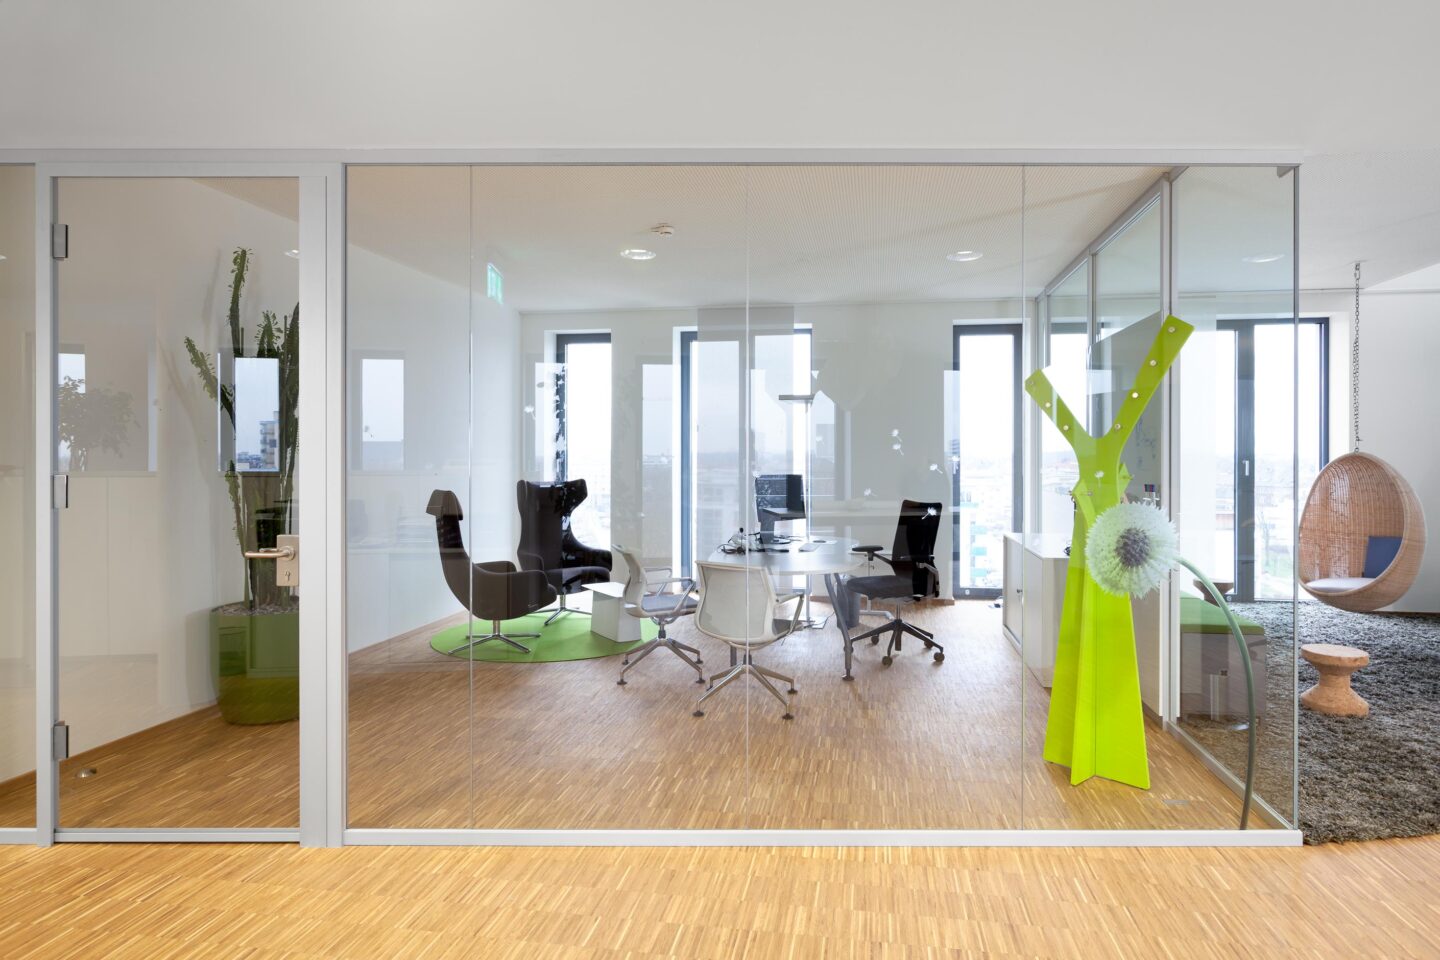 Disy information systems Karlsruhe │ all-glass construction │ Office furnishings with feco